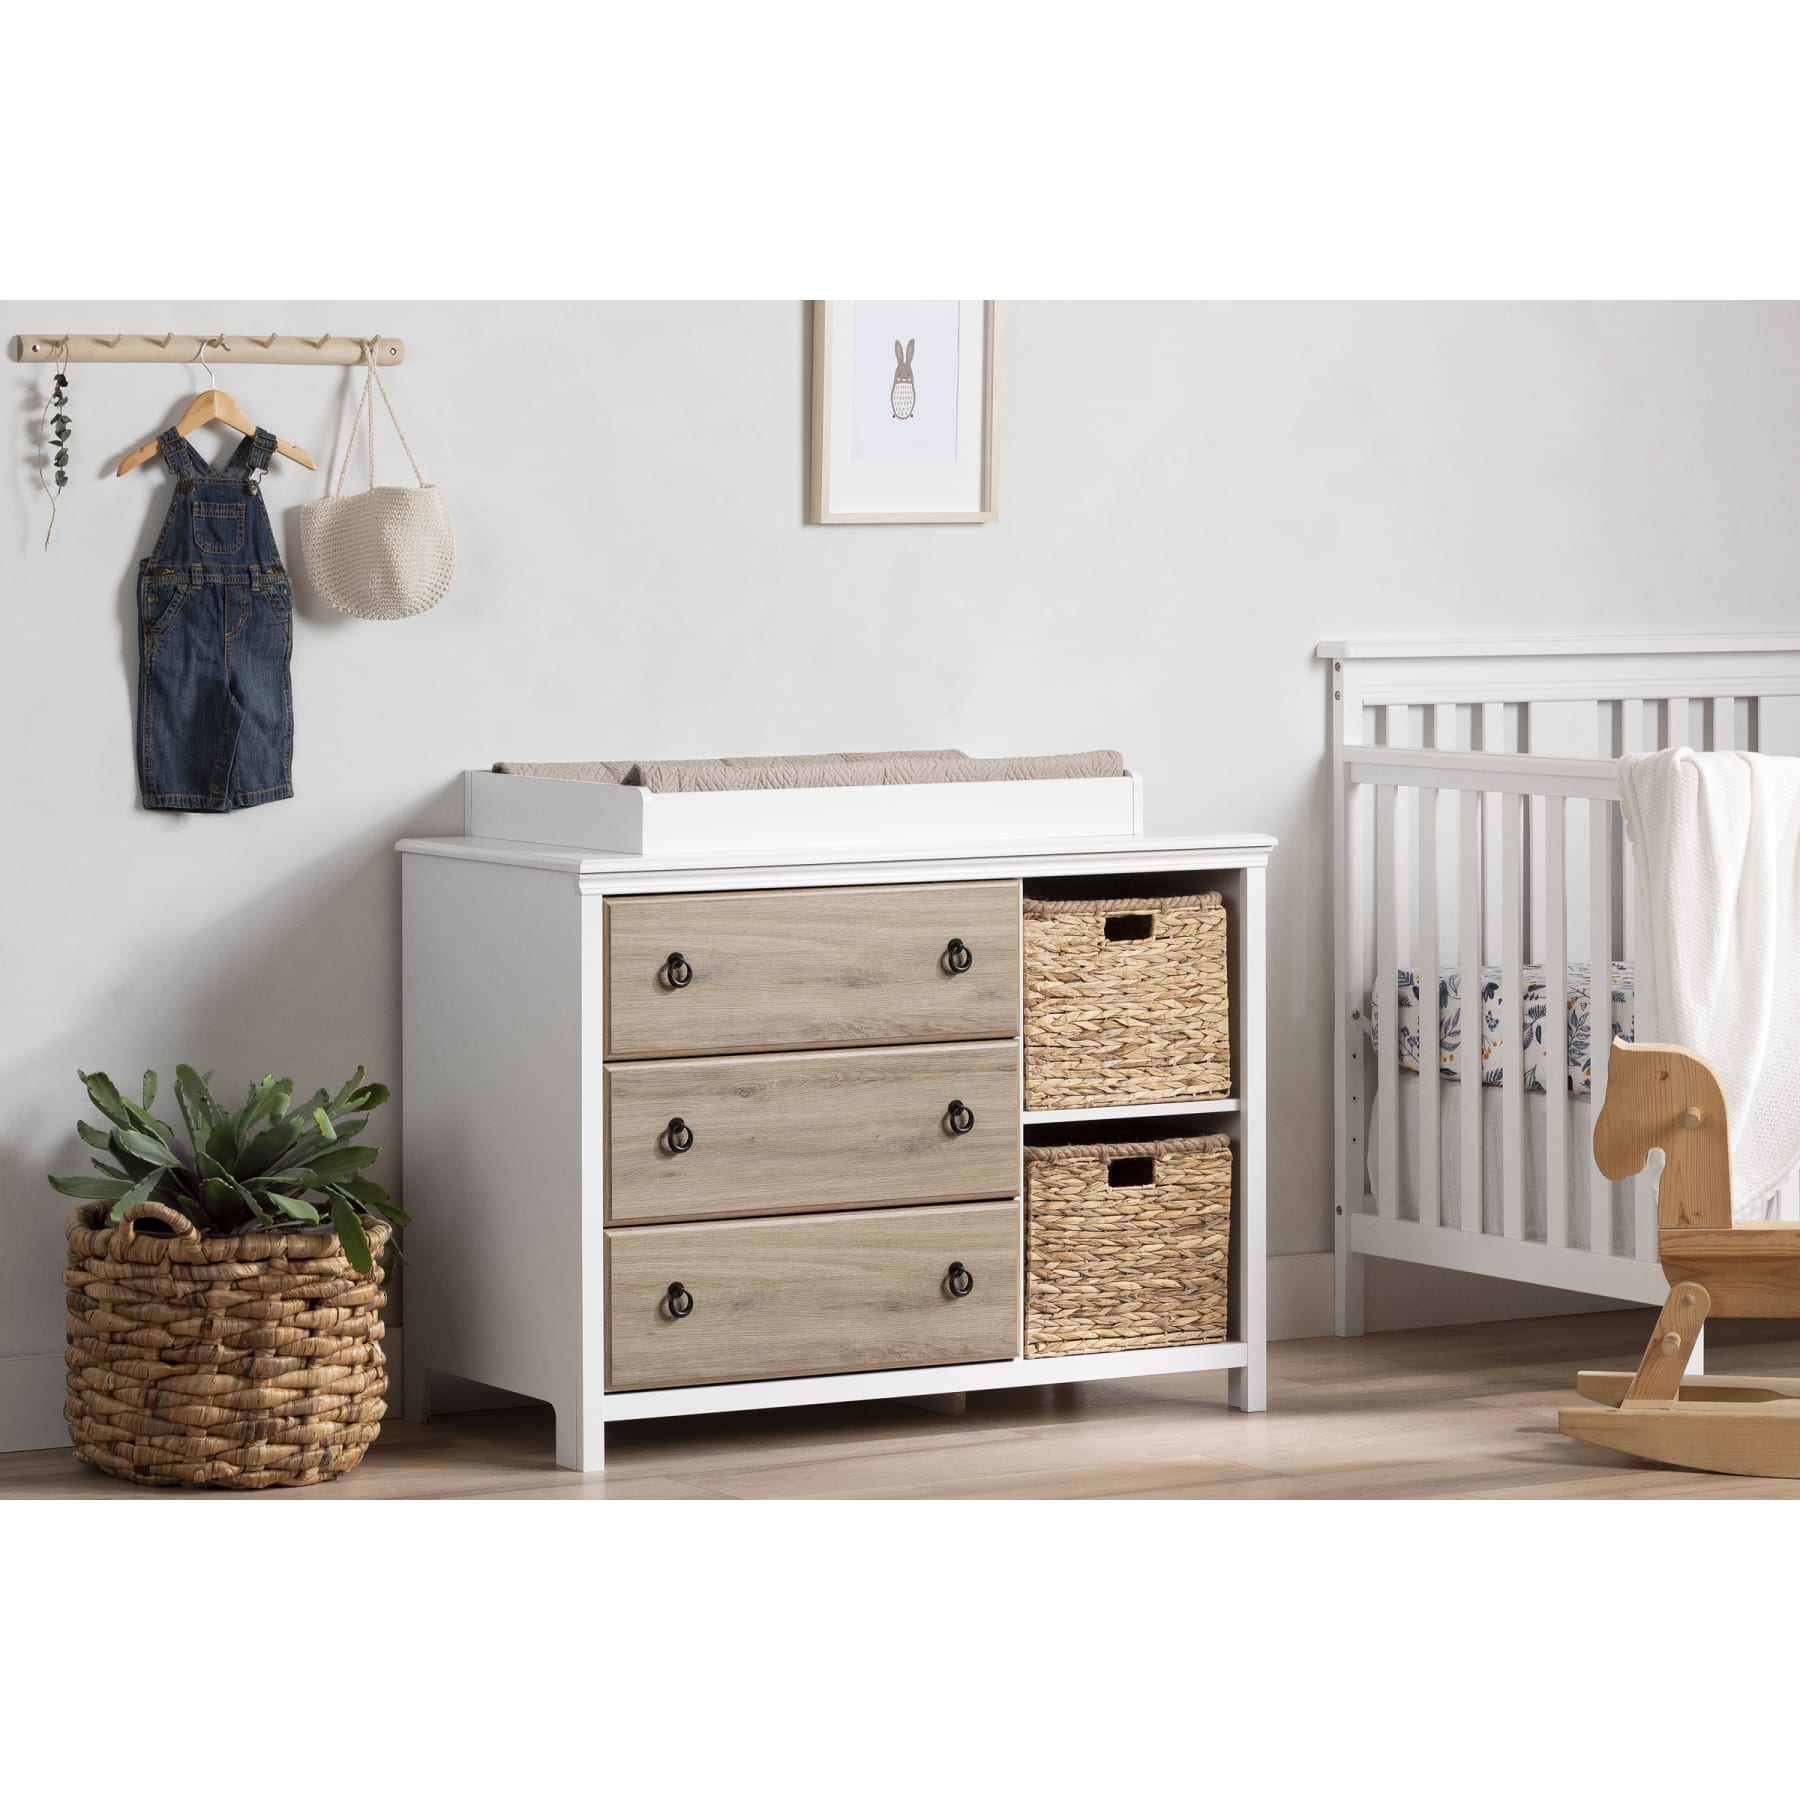 Nursery, Baby and Kids, Products